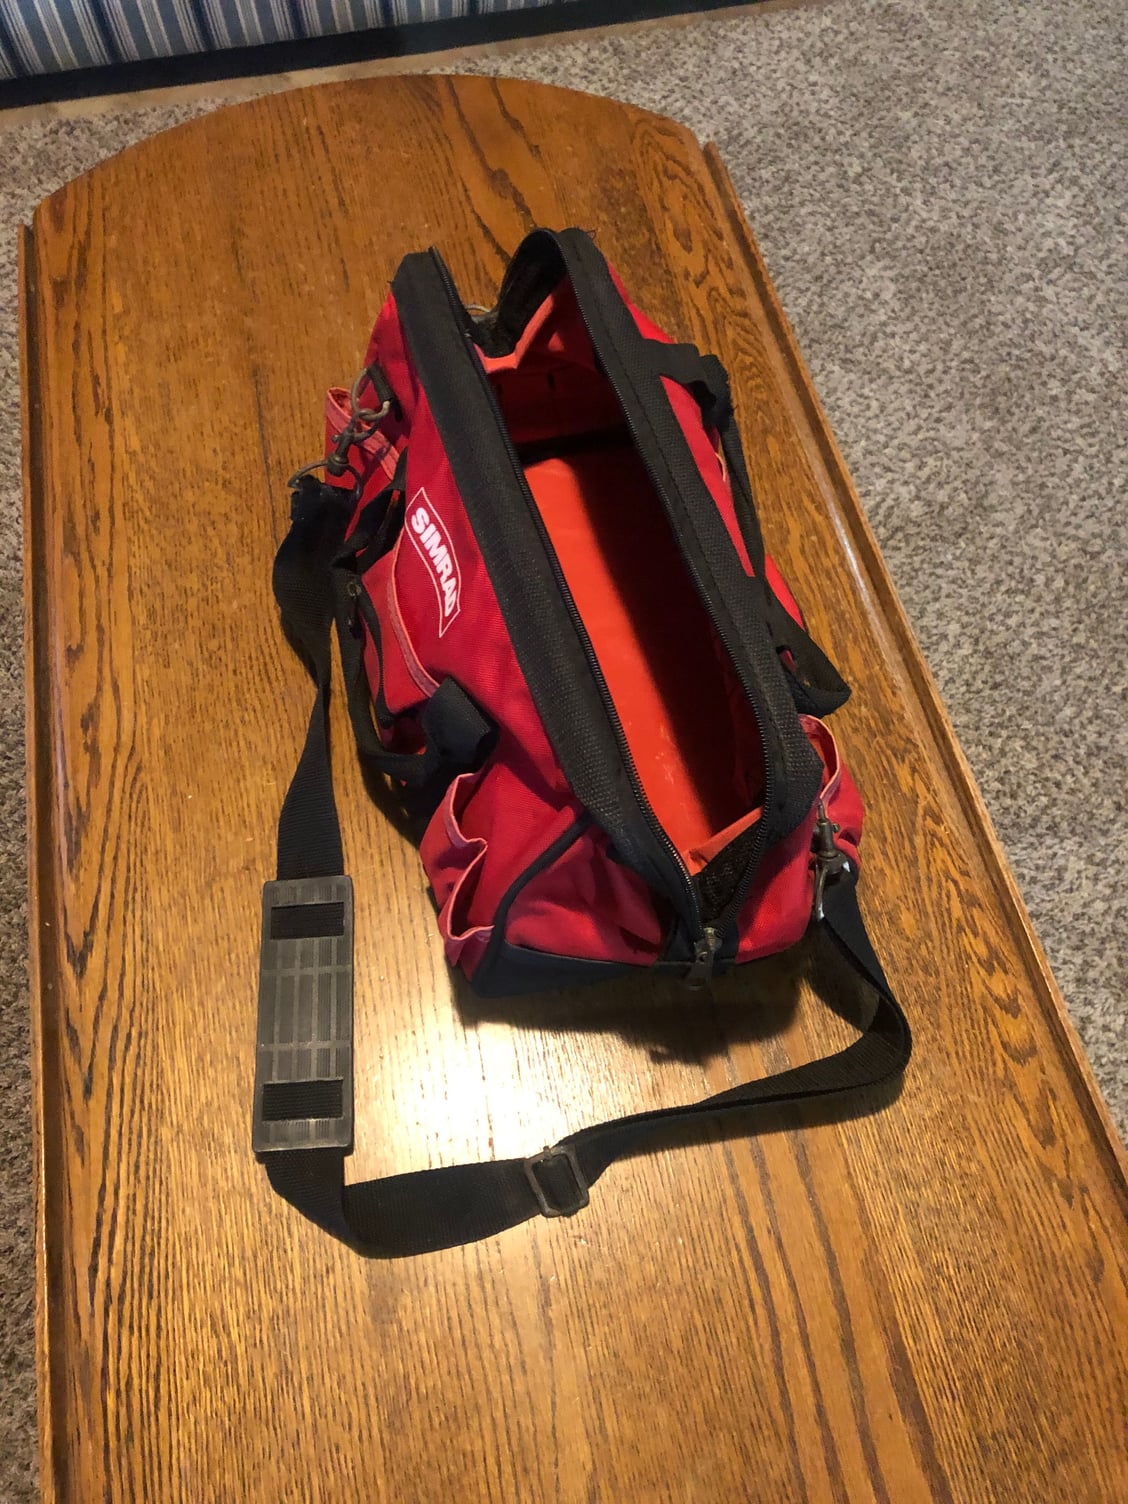 Simrad duffle bag - slightly used - SOLD!! - The Hull Truth - Boating and  Fishing Forum